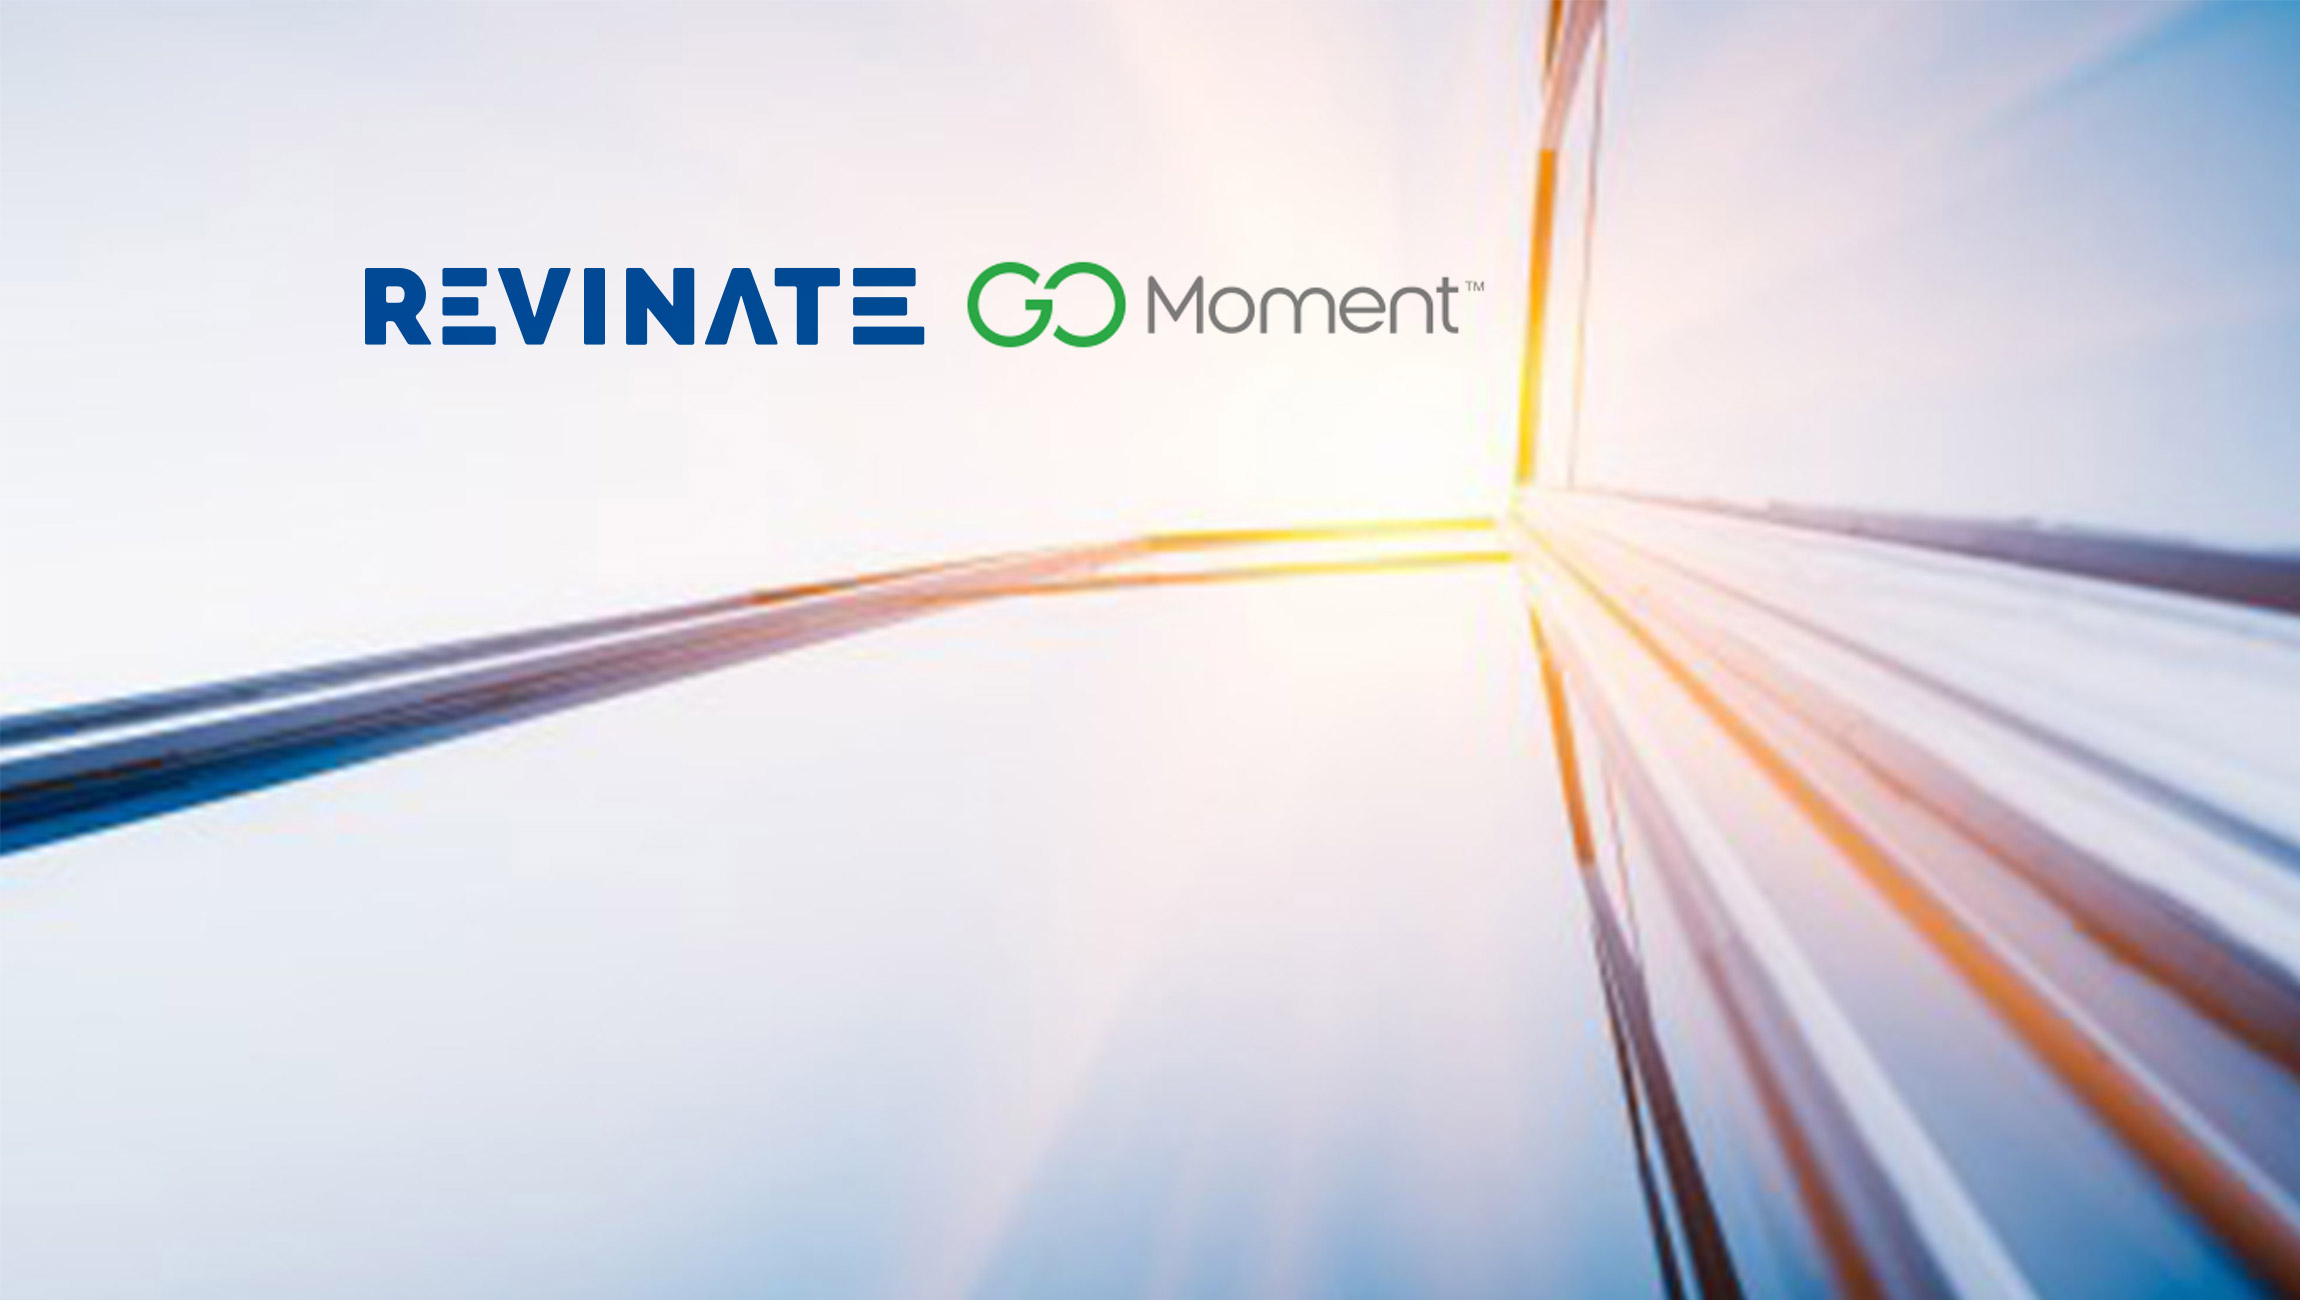 Revinate, a Leader in Omni-Channel Direct Booking Platforms for the Hospitality Industry, Acquires Go Moment